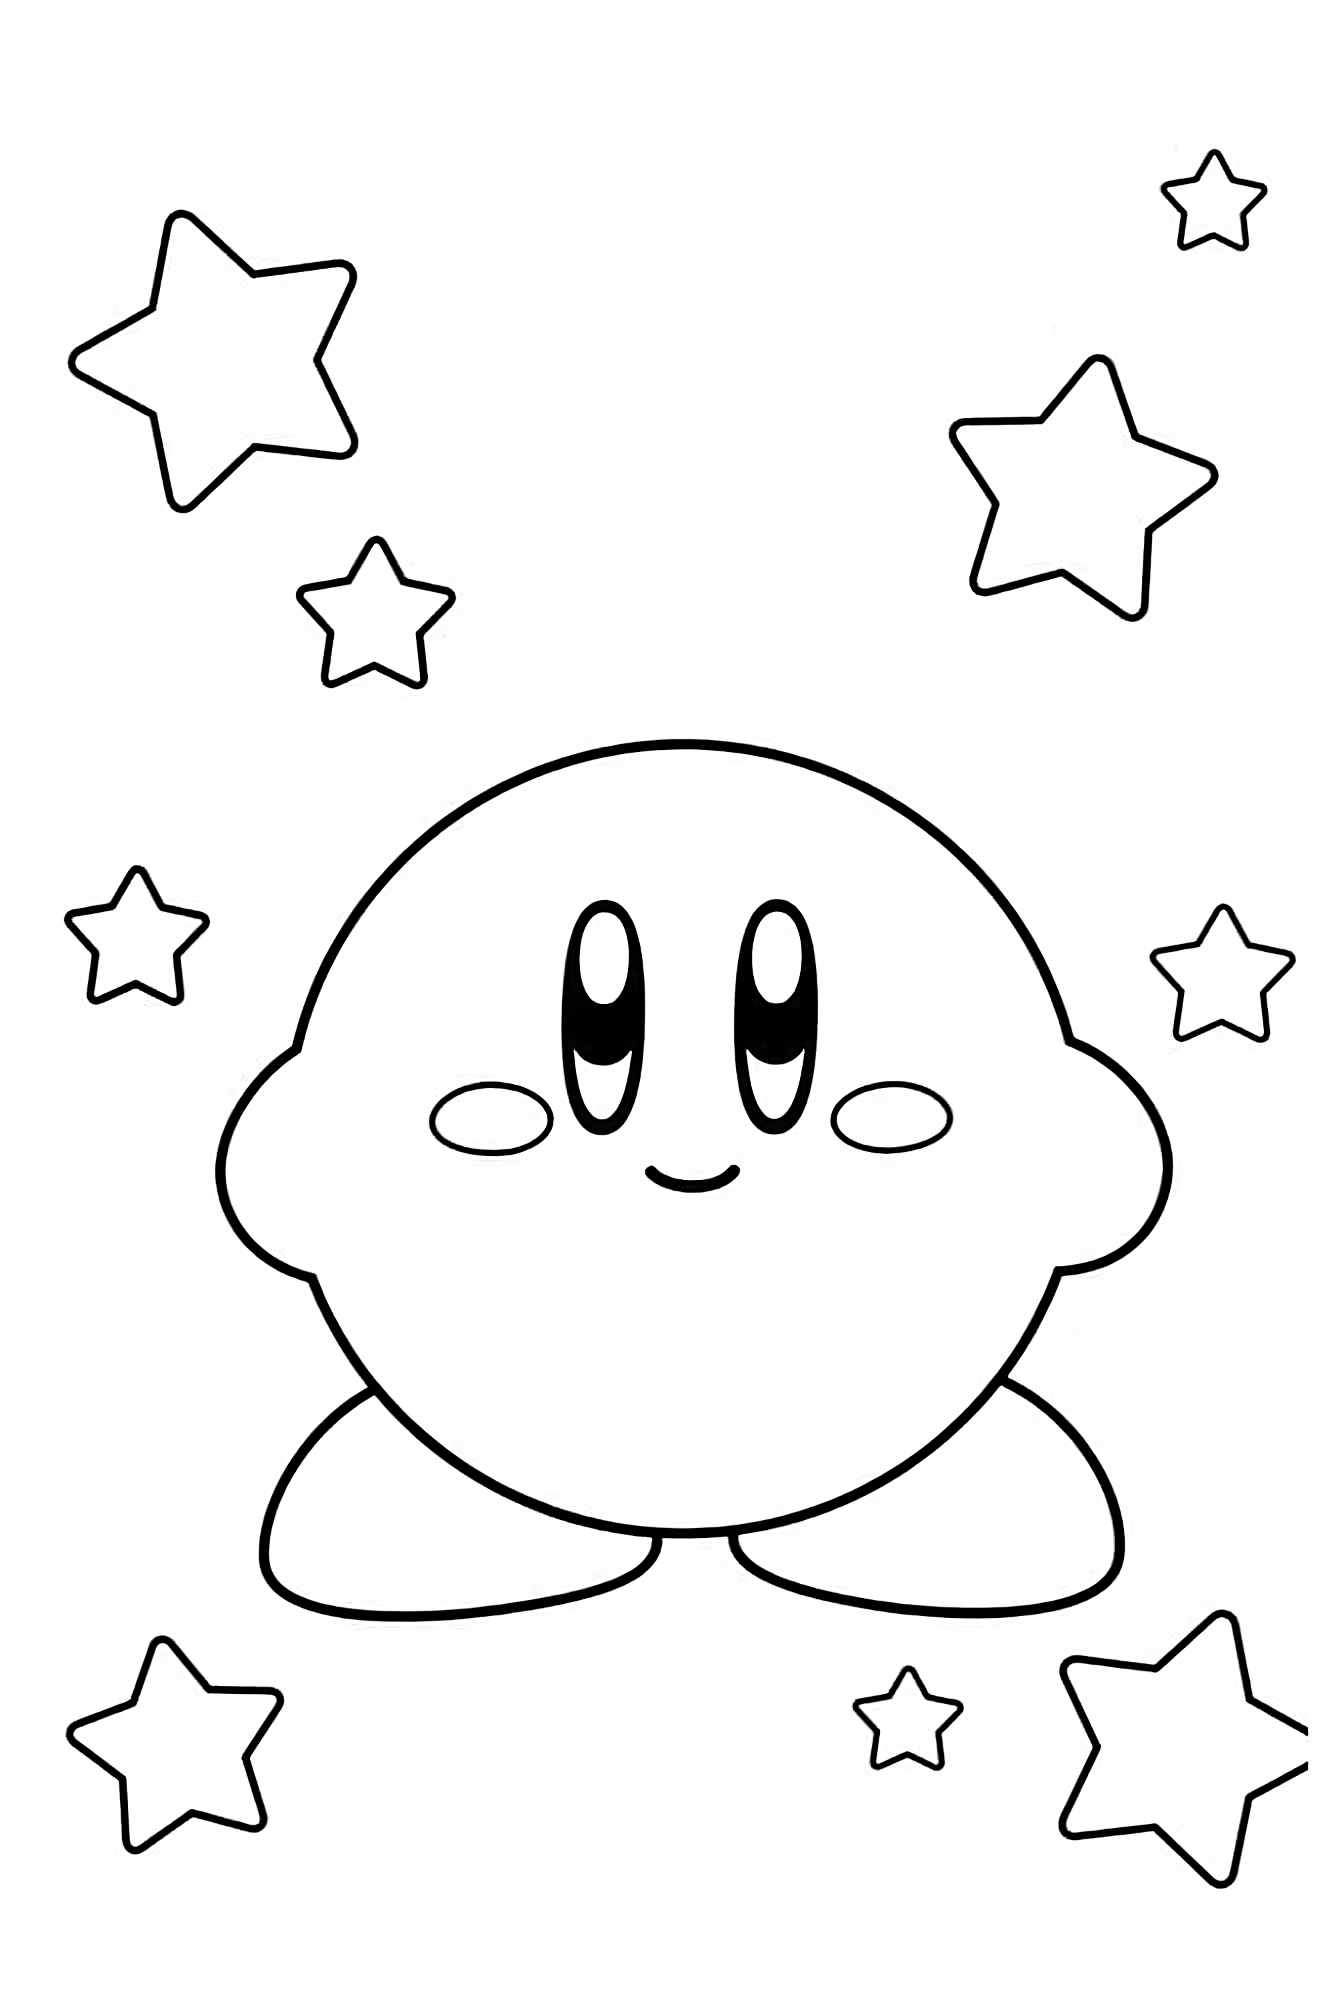 Kirby 09  coloring pages to print and coloring